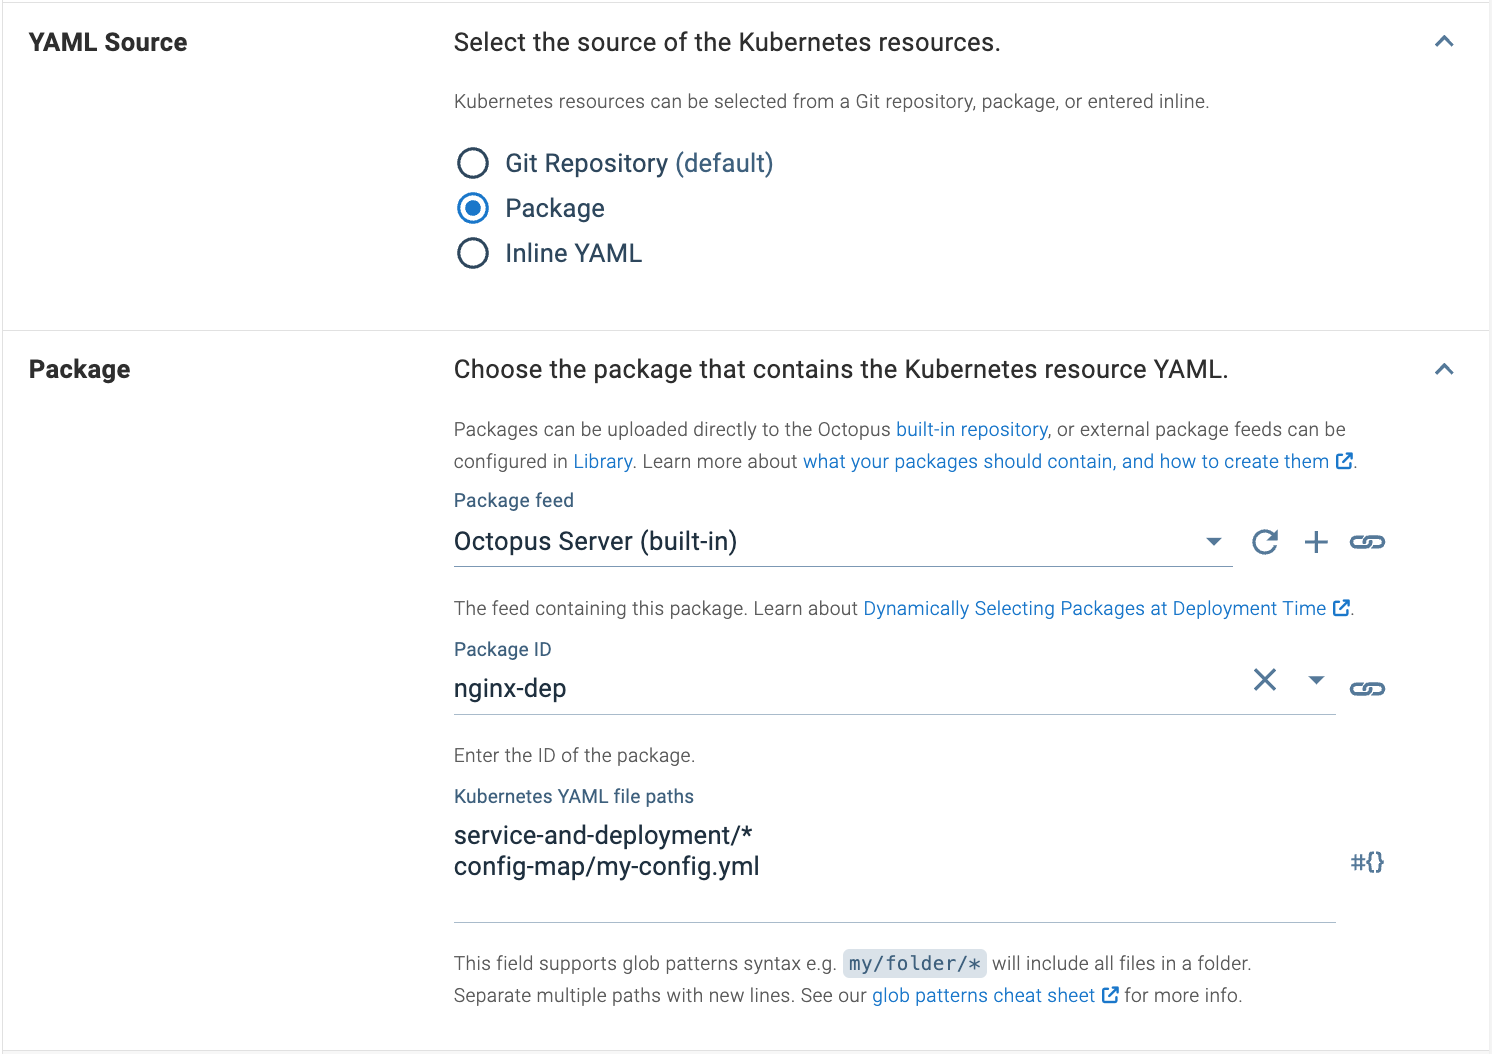 Deploy Kubernetes YAML with a Package